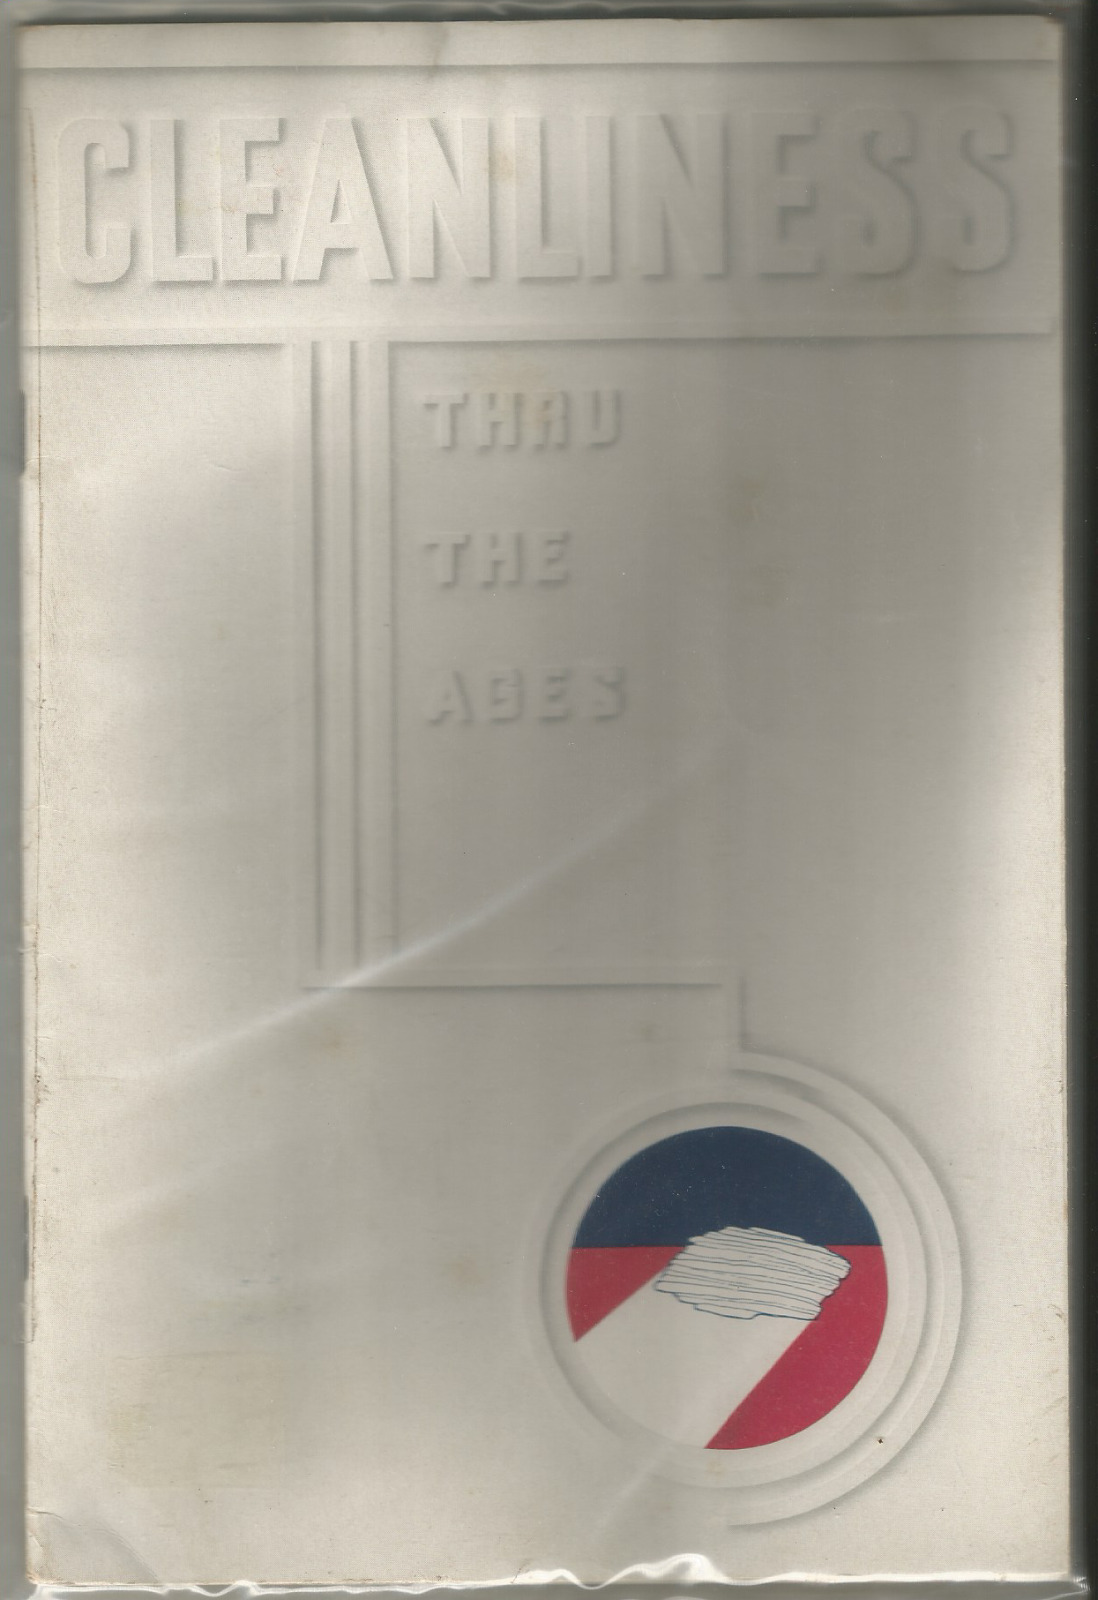 1939 CENTURY OF PROGRESS Booklet OLD DUTCH CLEANSER Cleanliness Worlds Fair